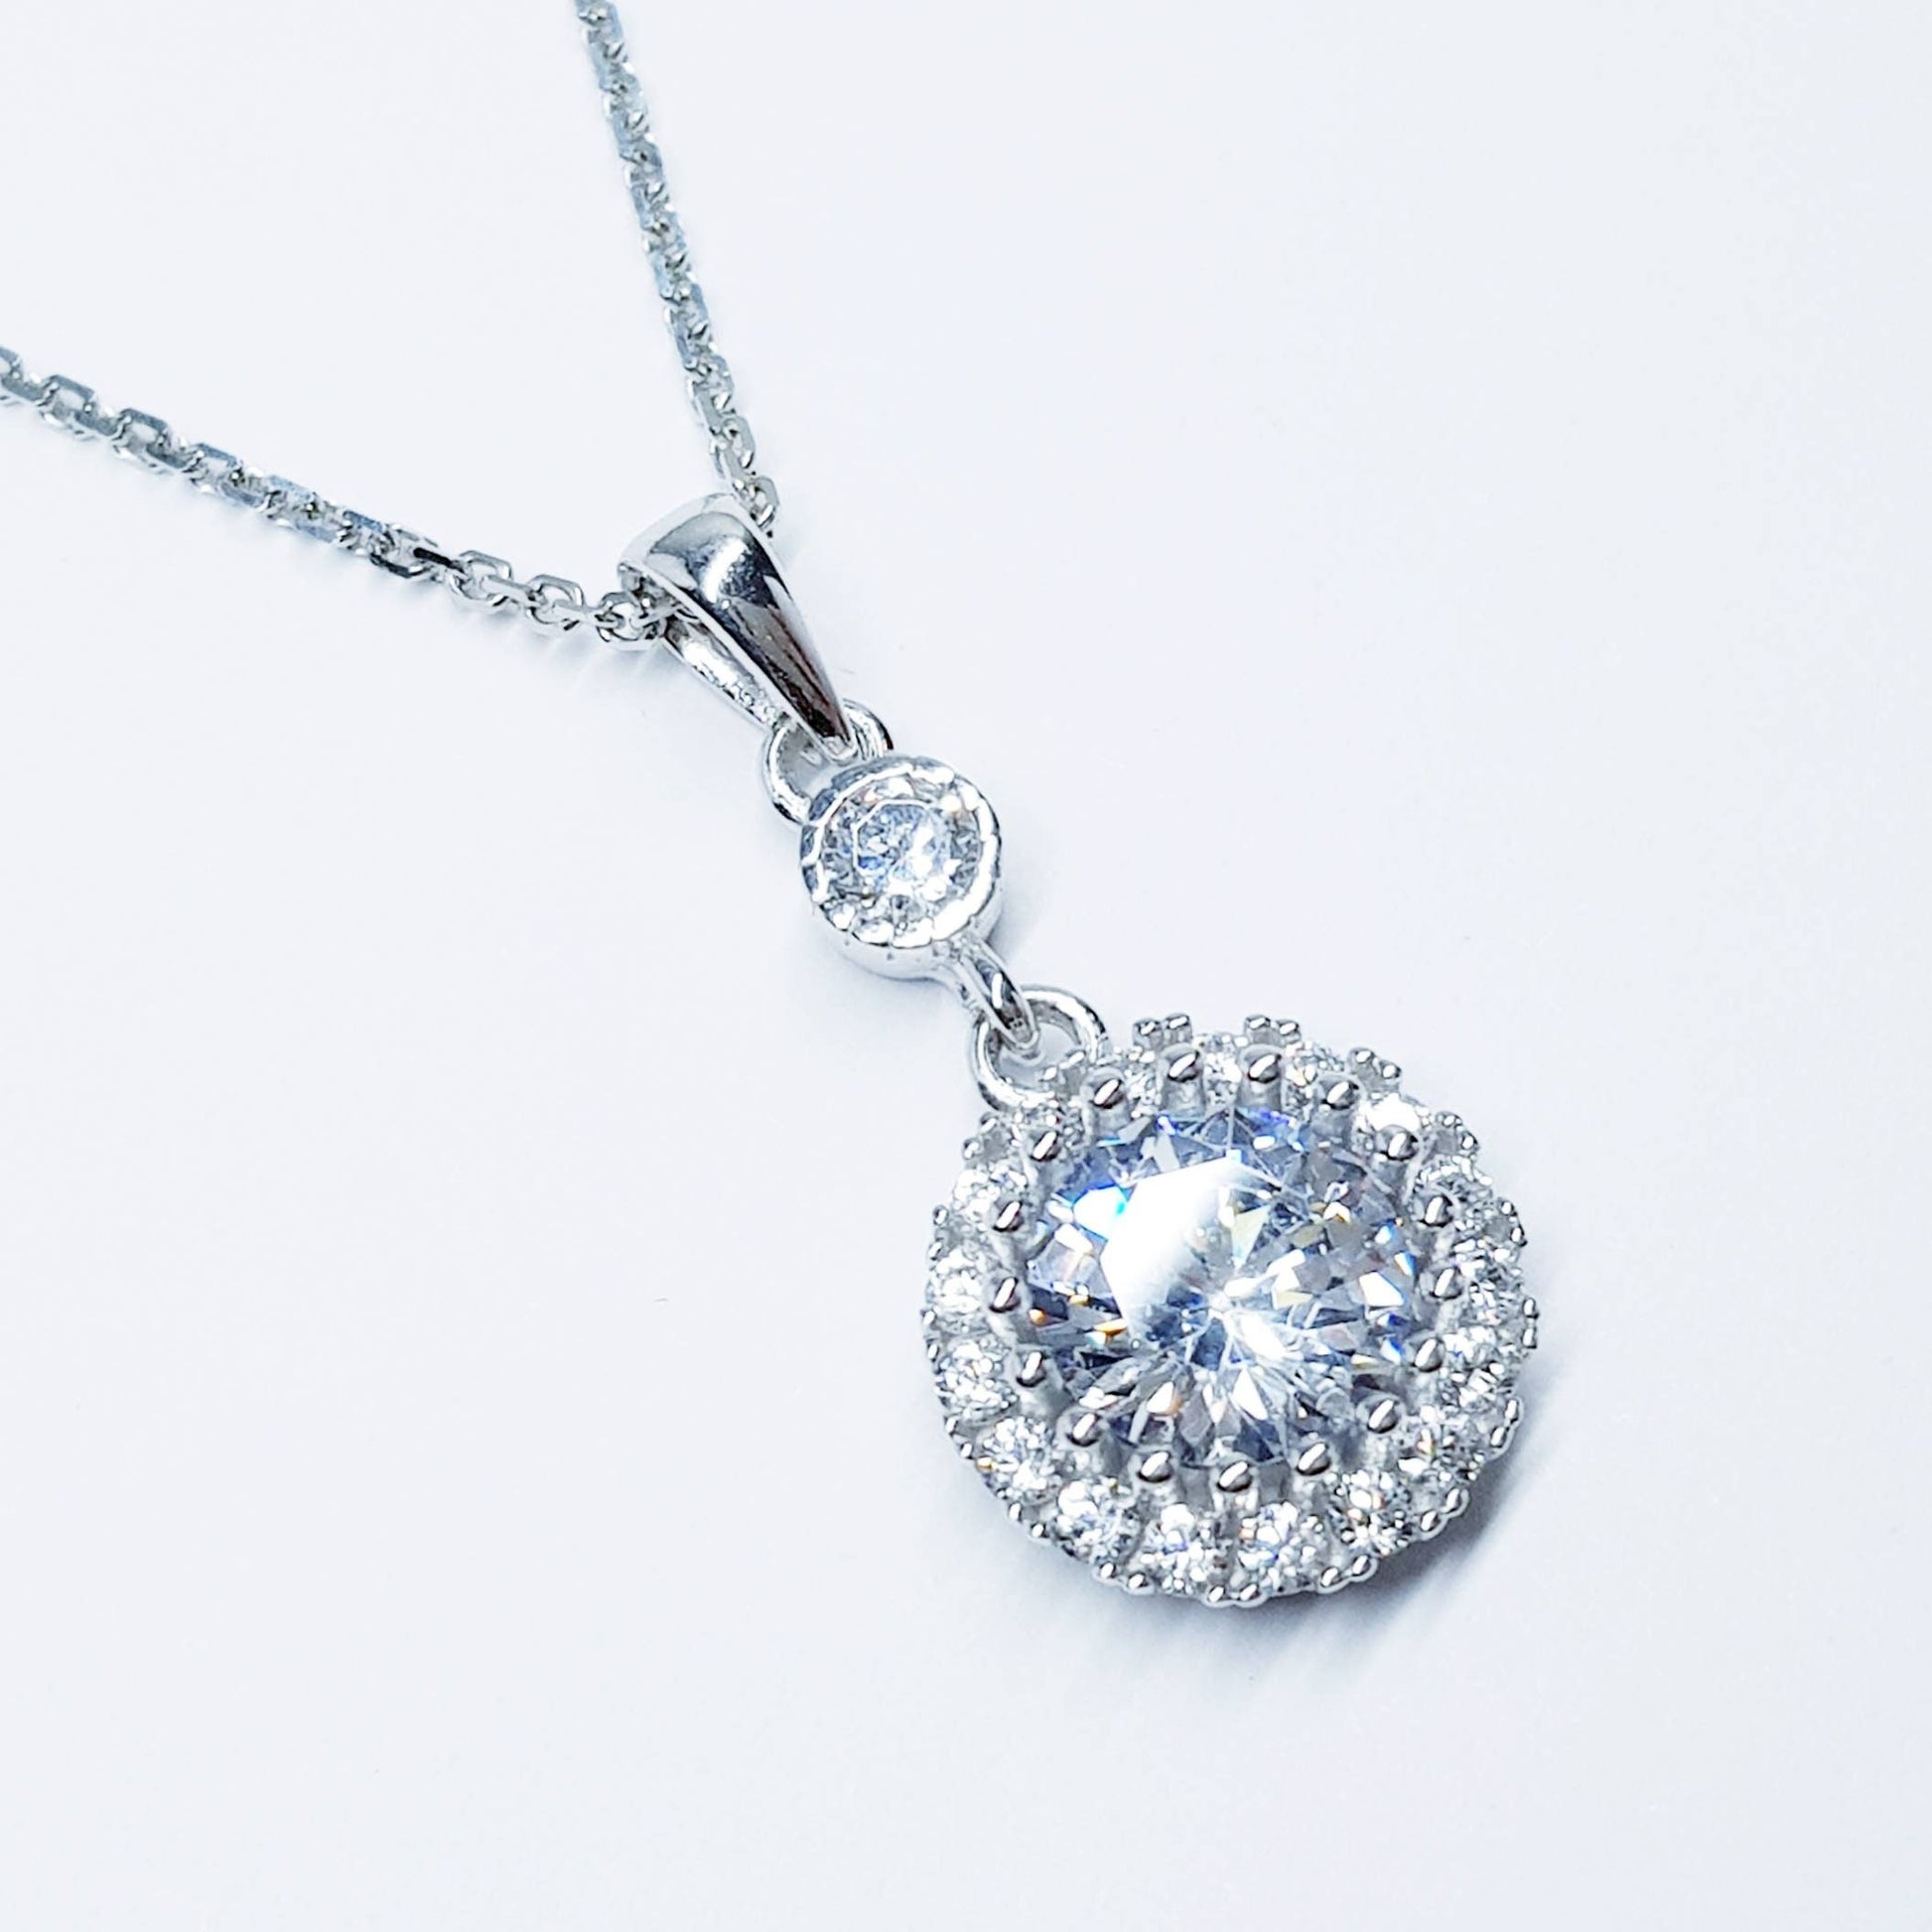 Vintage style round sterling silver necklace with sparkling white cubic zirconia